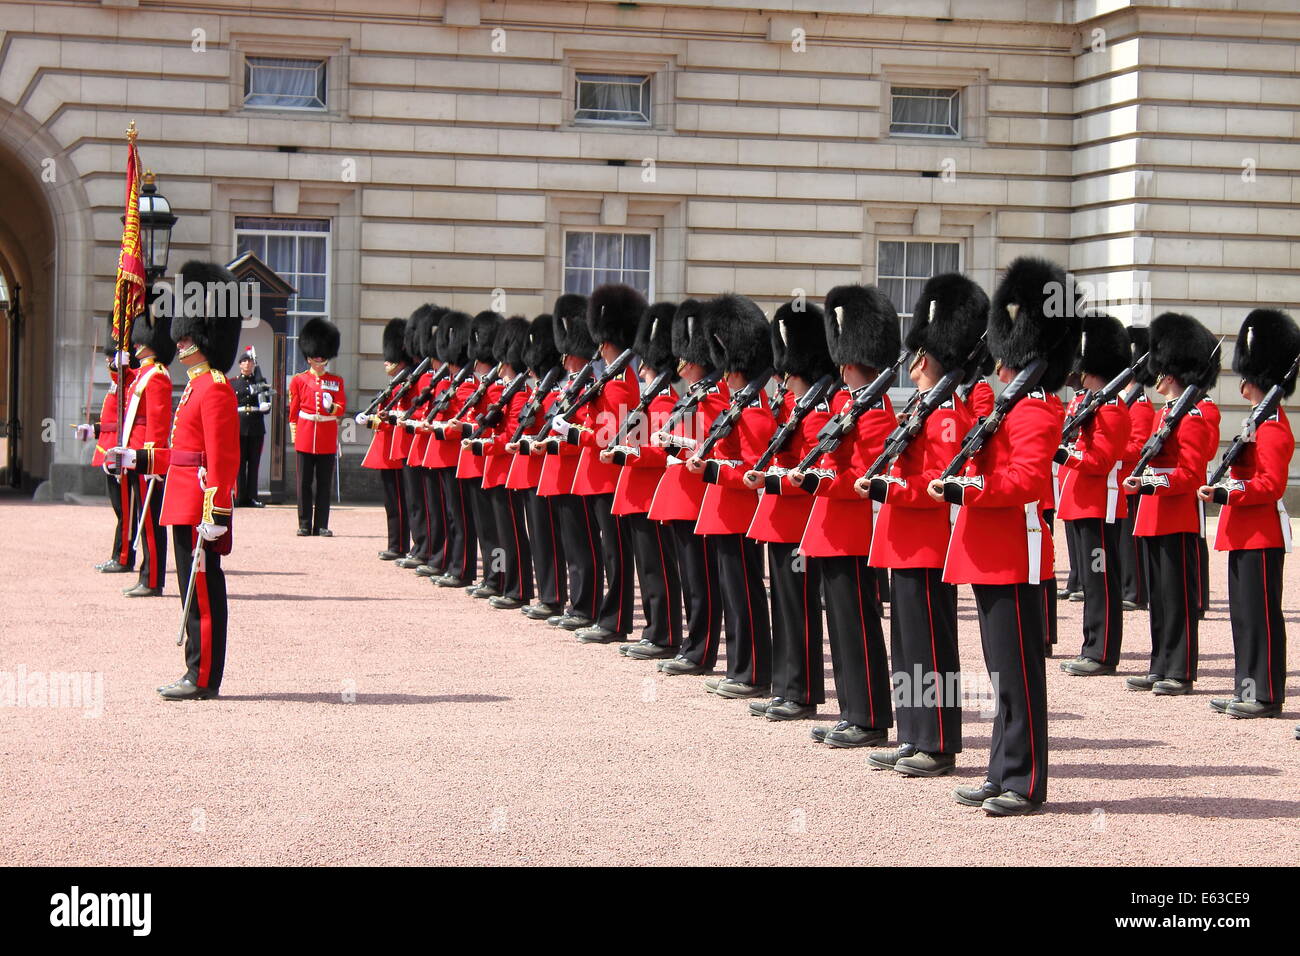 LONDON - MAY 21: British Royal guards performs the Changing of the Guard in Buckingham Palace on May 21, 2010 in London, UK Stock Photo